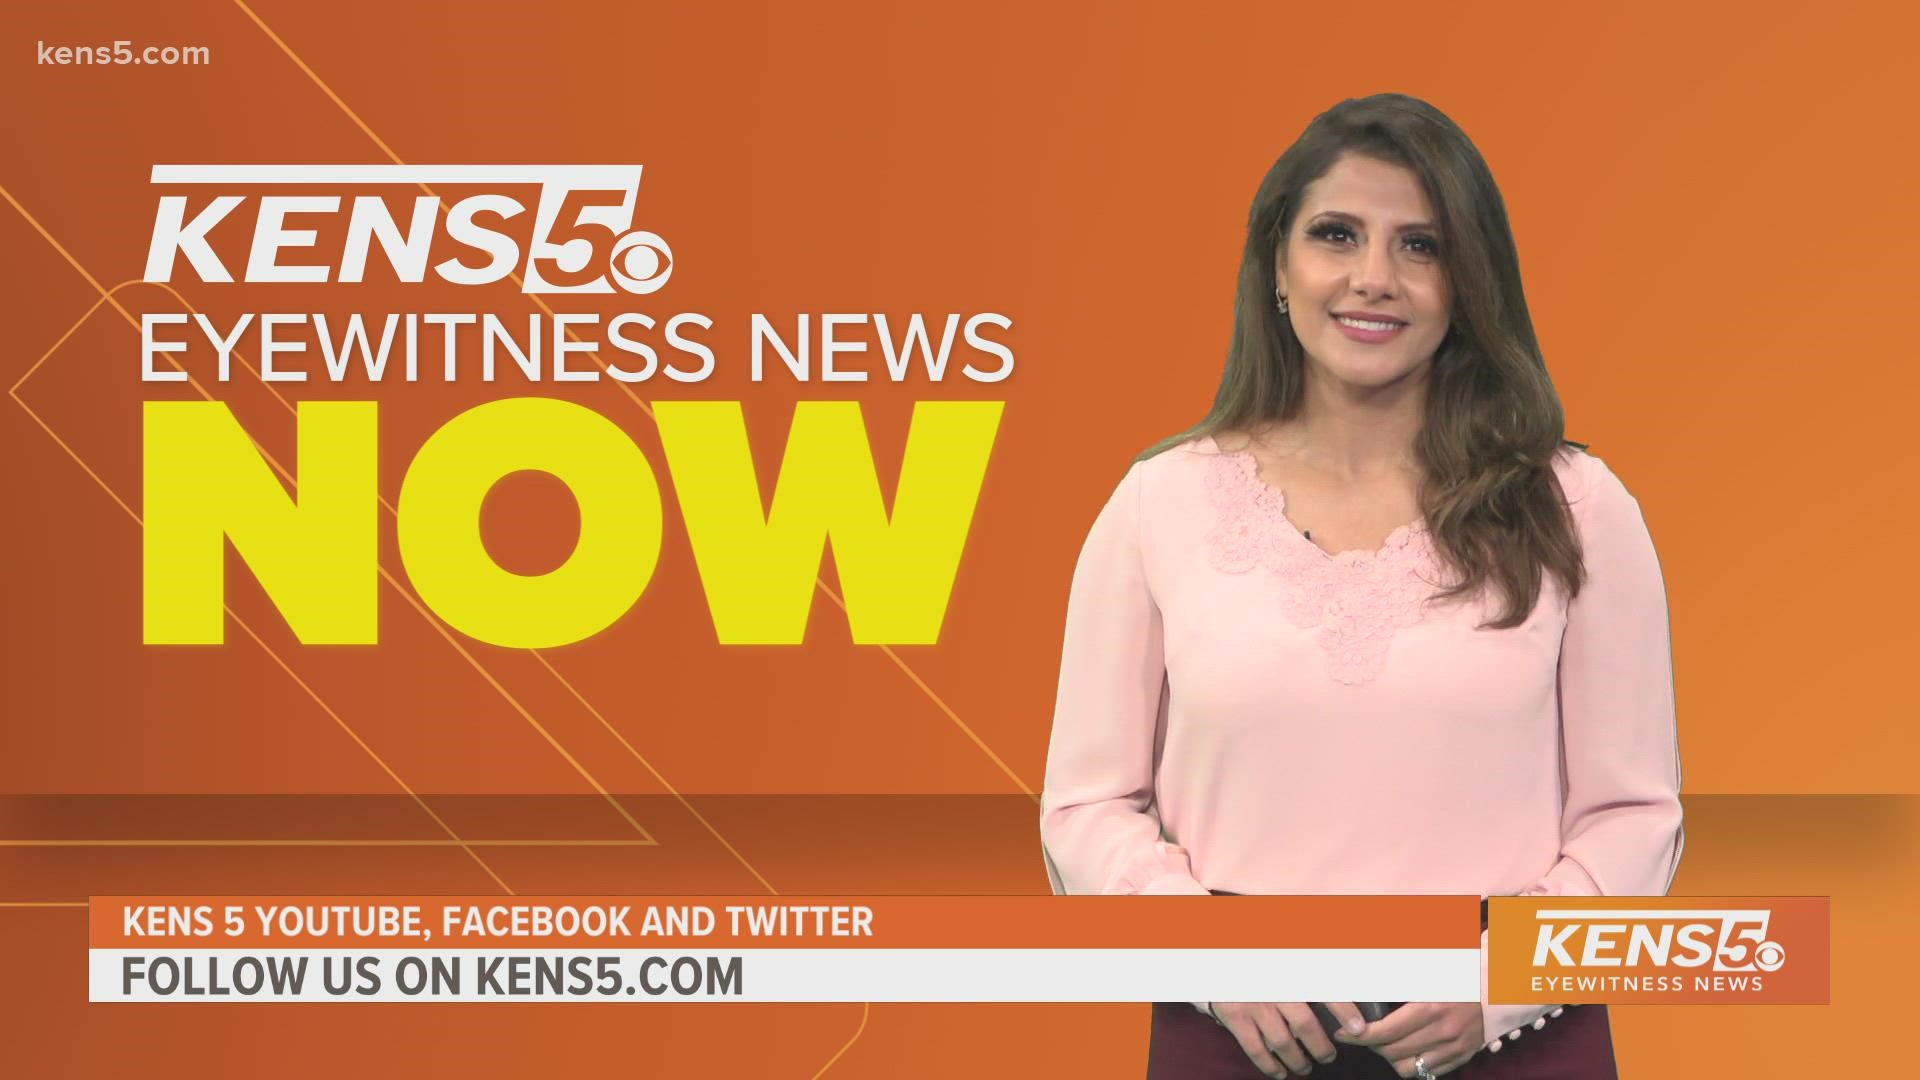 Follow us here to get the latest with Sarah Forgany every weekday from KENS 5.